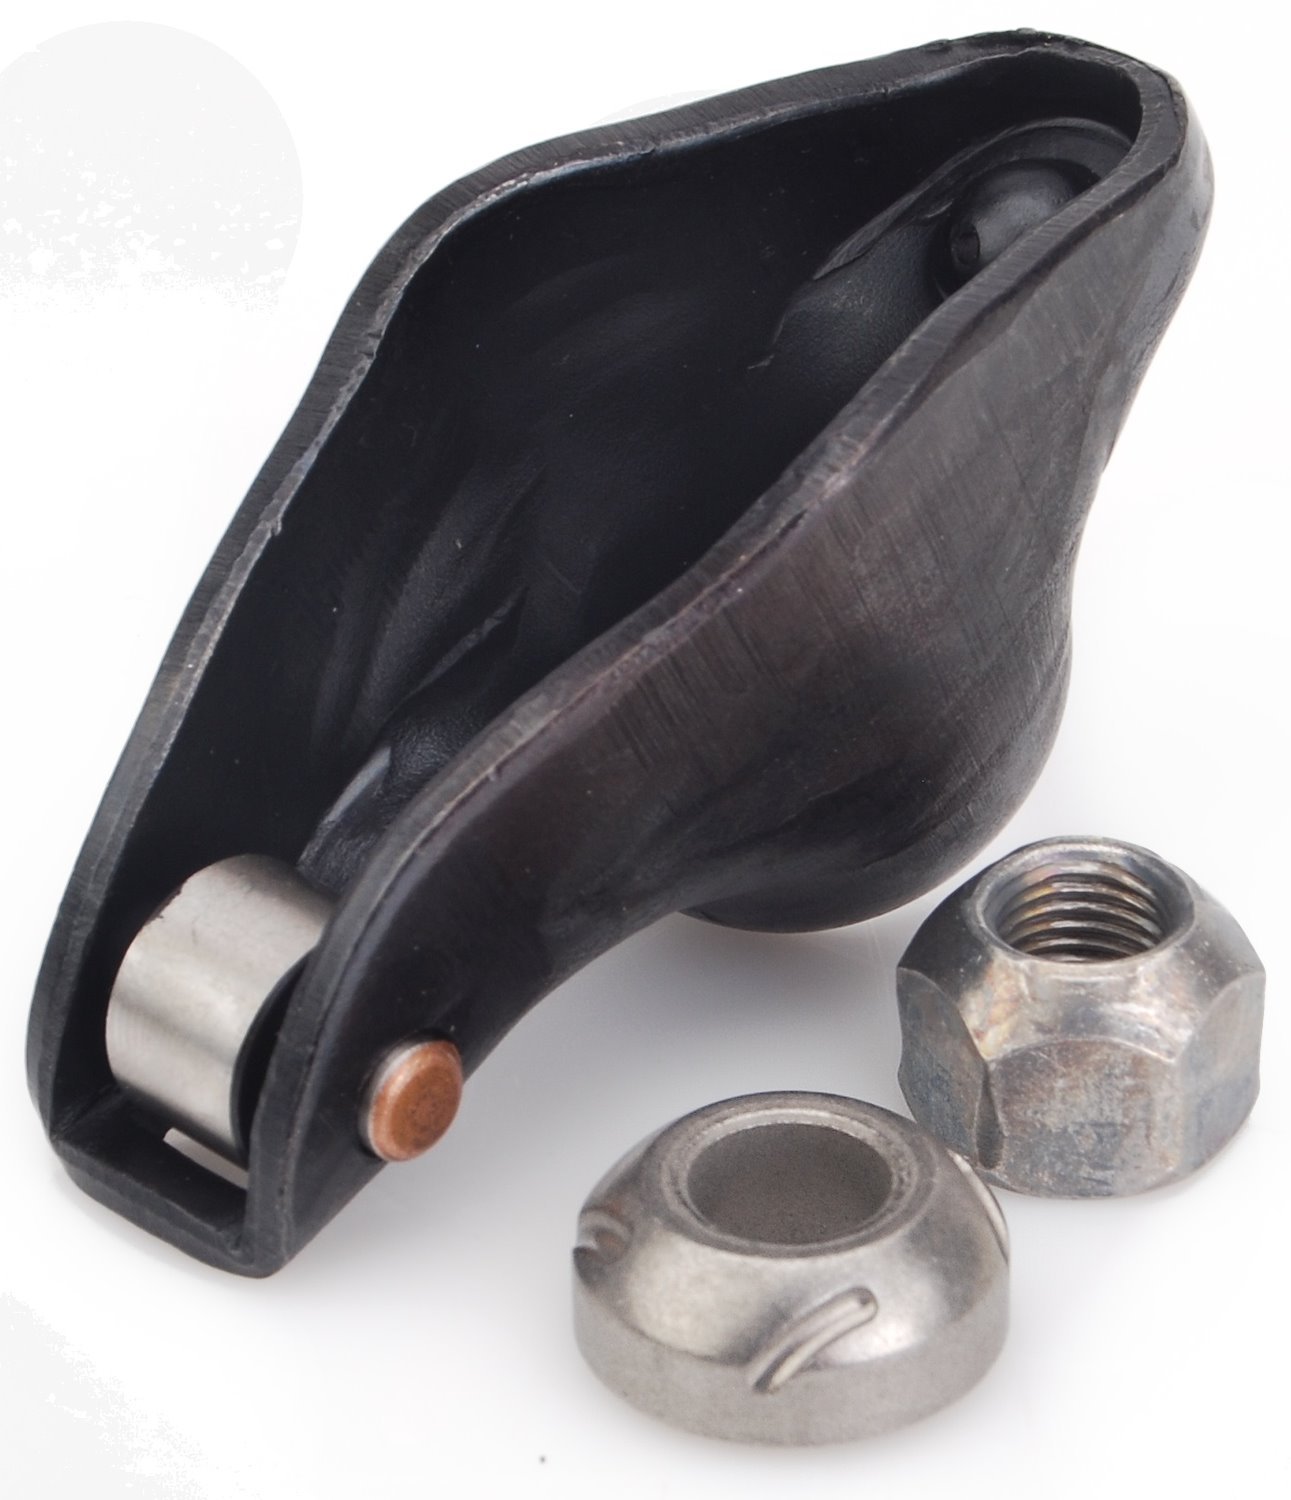 Stamped Steel Roller Tip Rocker Arm for 1955-1986 Small Block Chevy [Sold Individually]